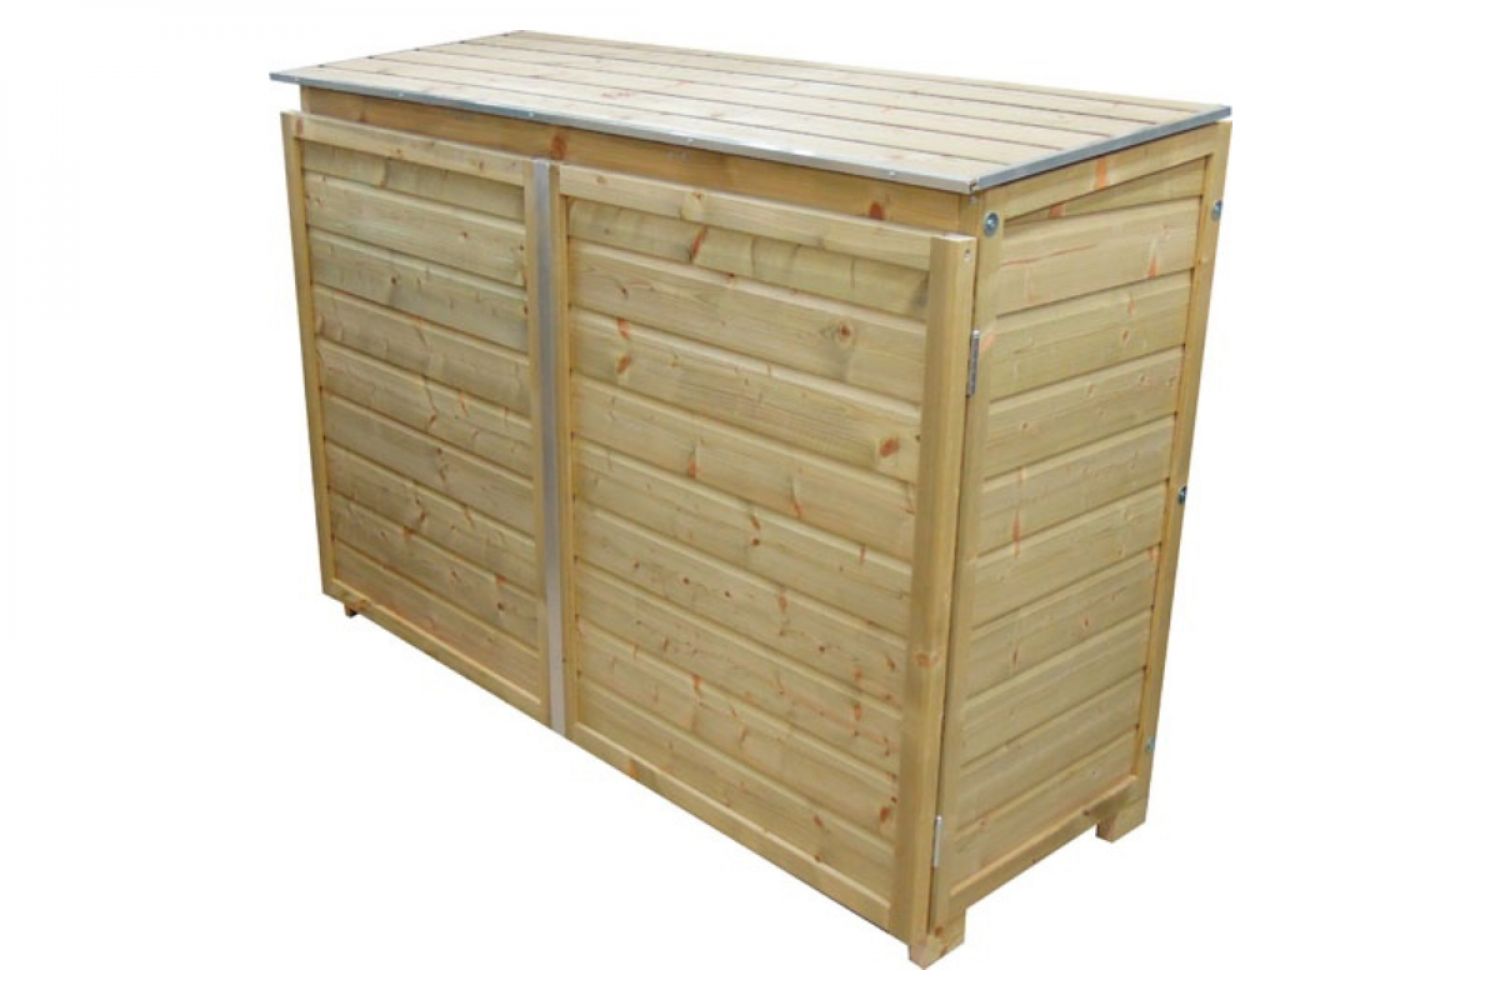 LK240TRIO-R Containerberging | 208x90x125 cm - voor 3 containers!